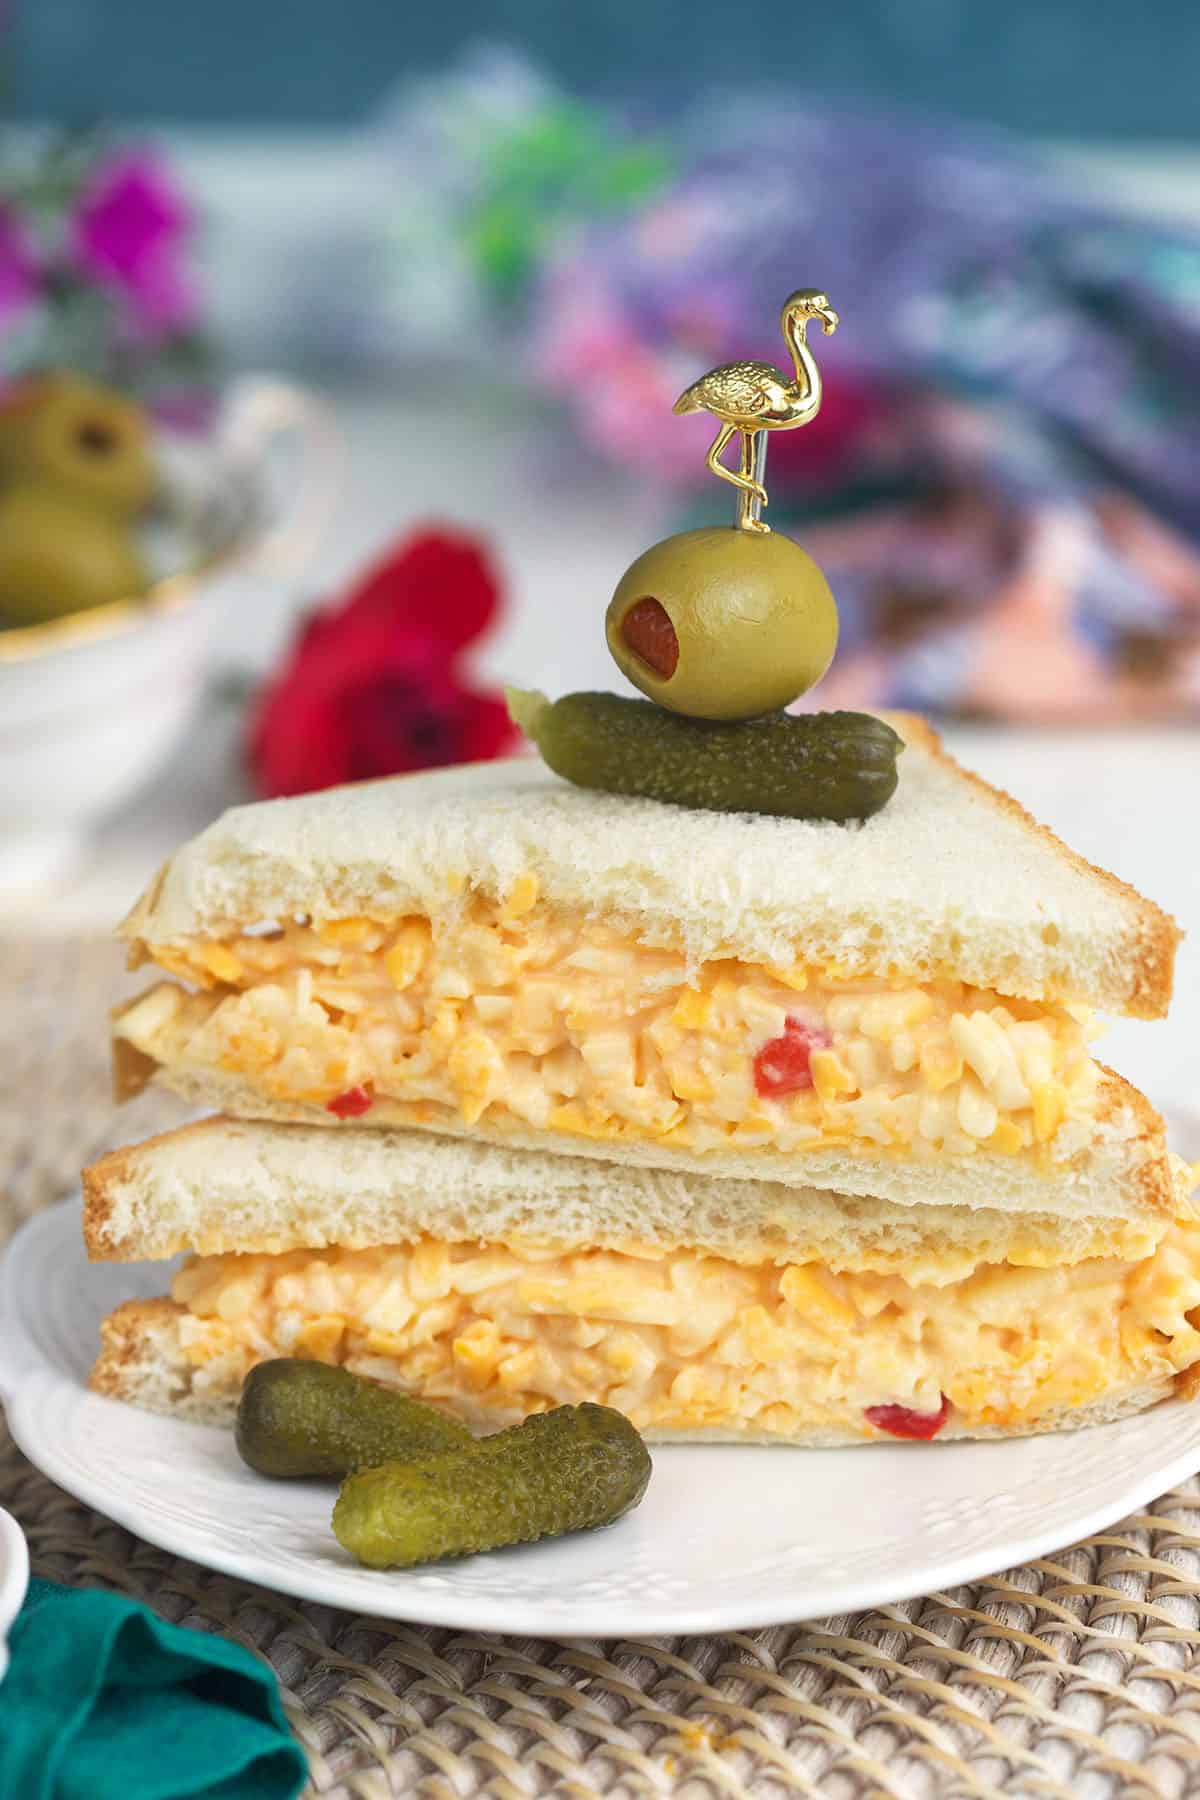 Pickles and olives garnish a pimento cheese sandwich.